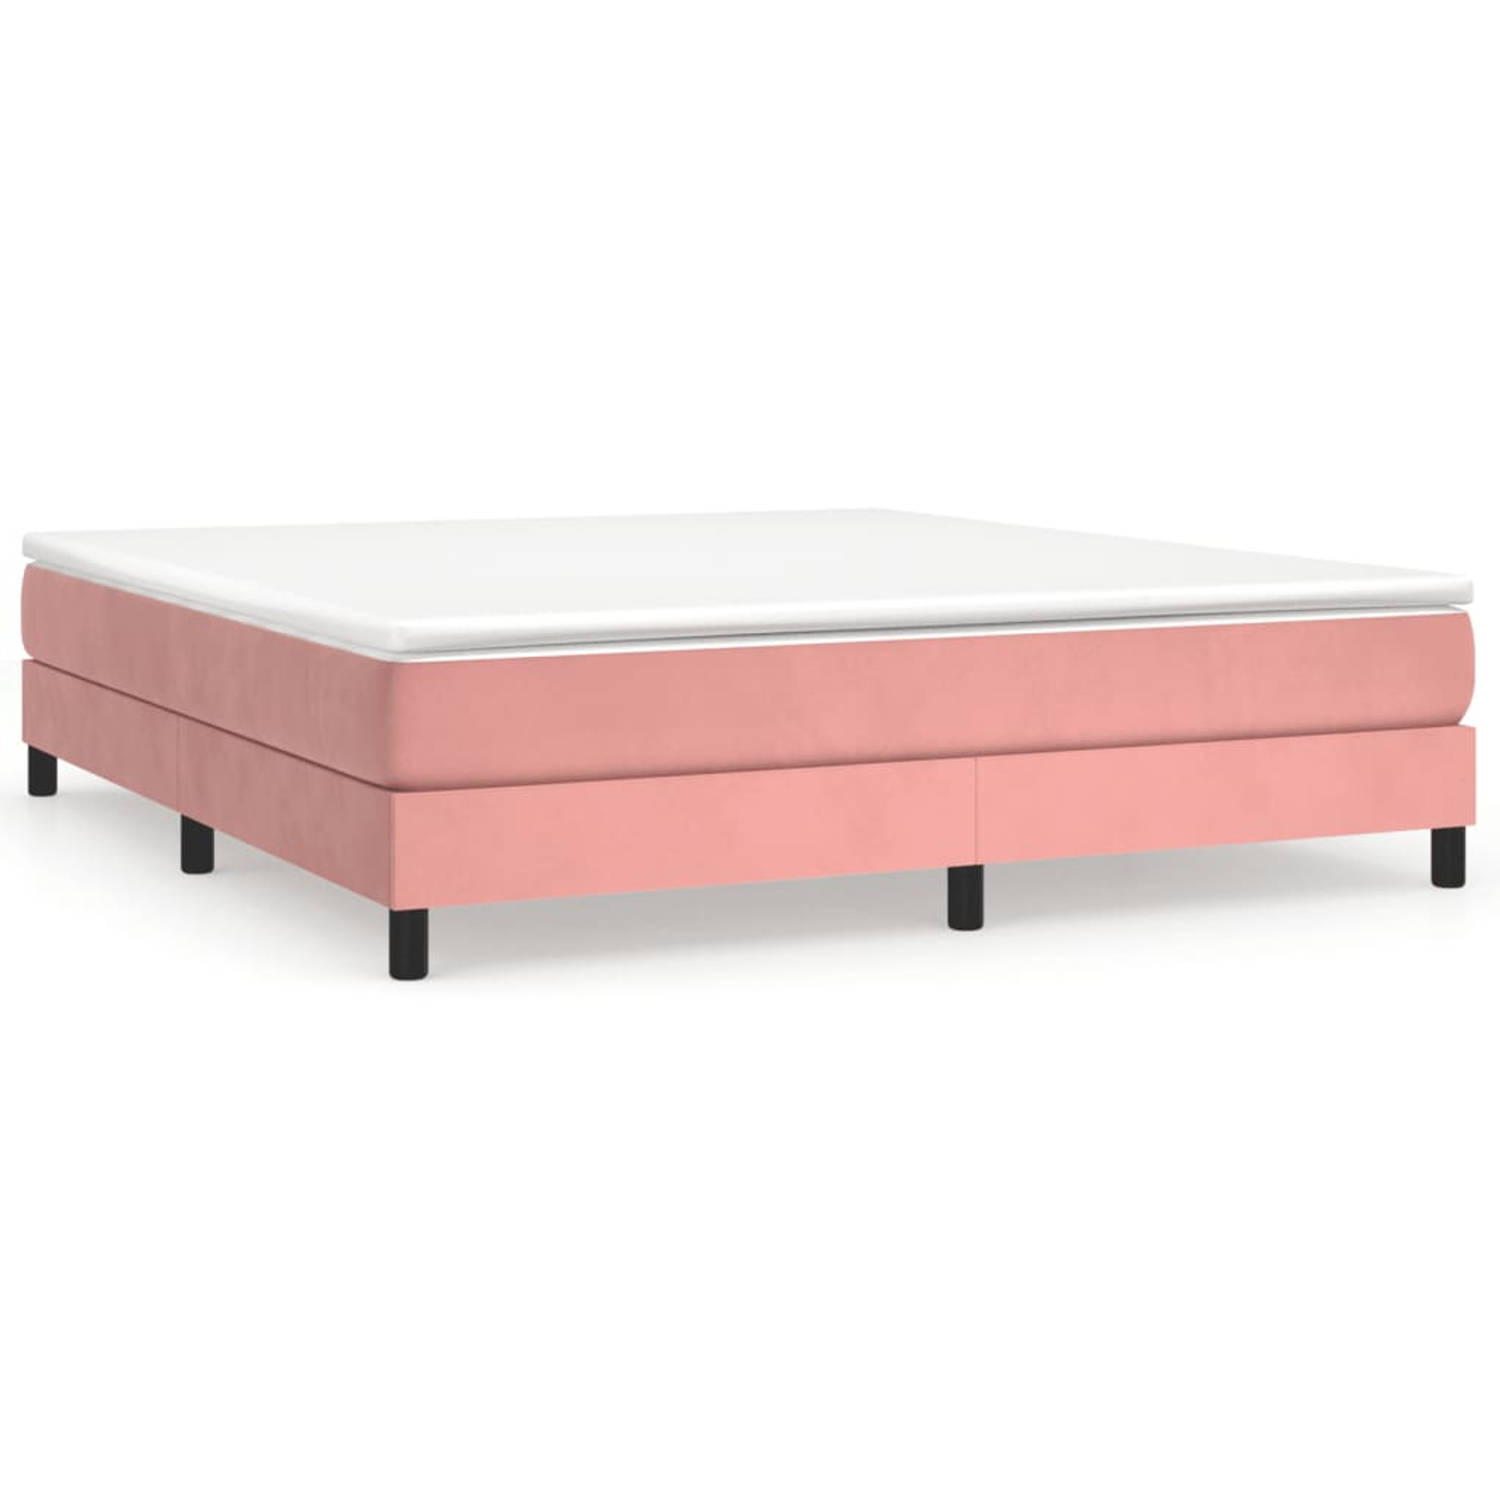 The Living Store Boxspringframe fluweel roze 160x200 cm - Bed